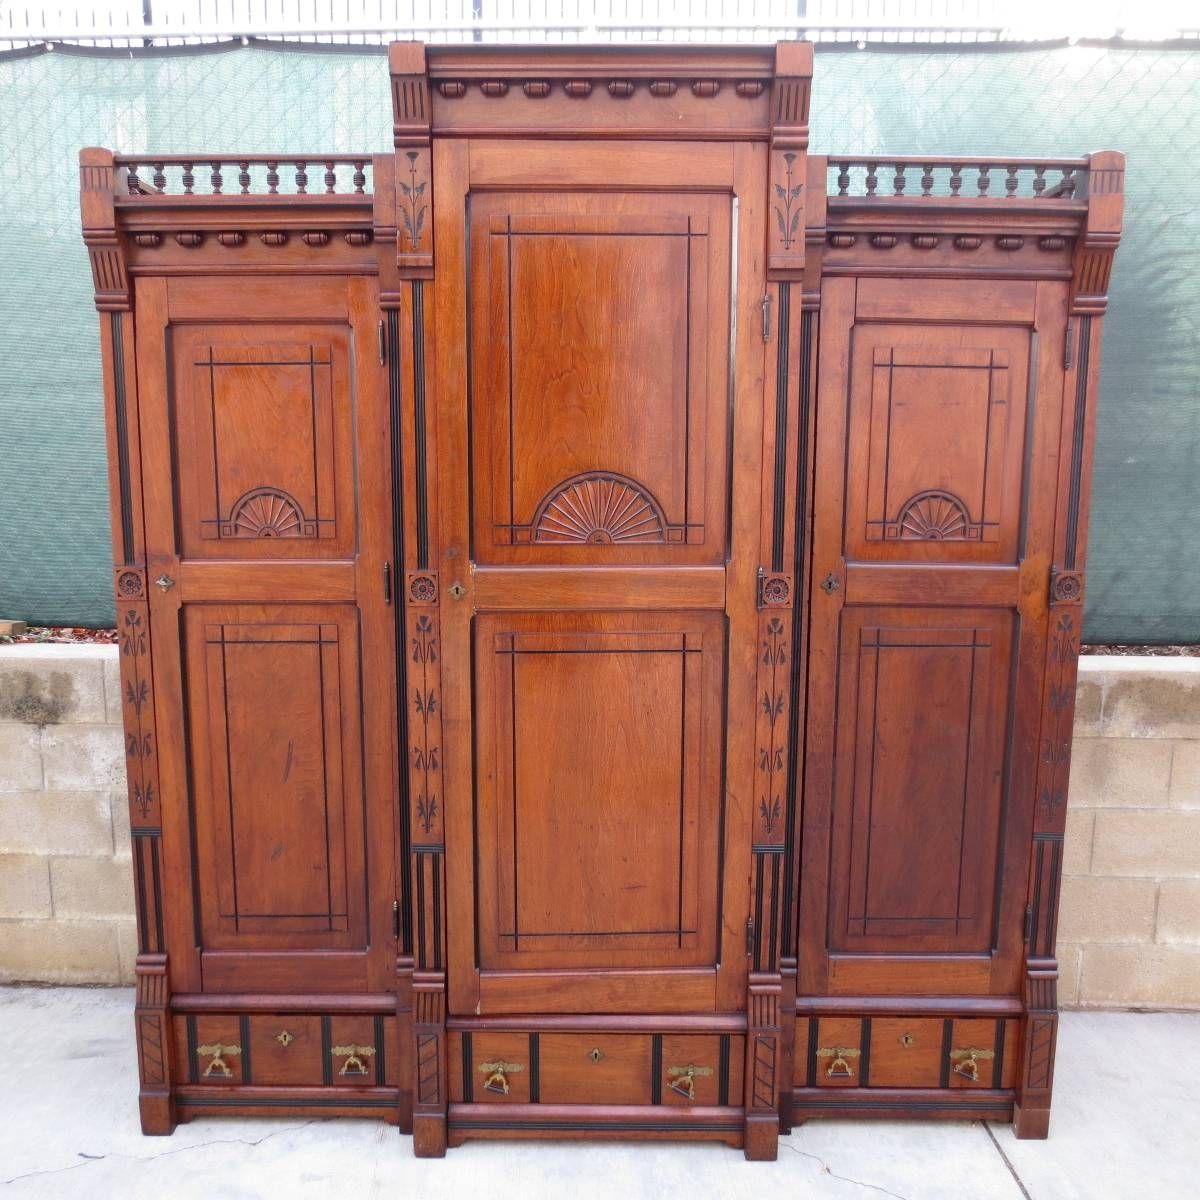 Antique Armoires, Antique Wardrobes, And Antique Furniture From With Antique Wardrobes (View 7 of 15)